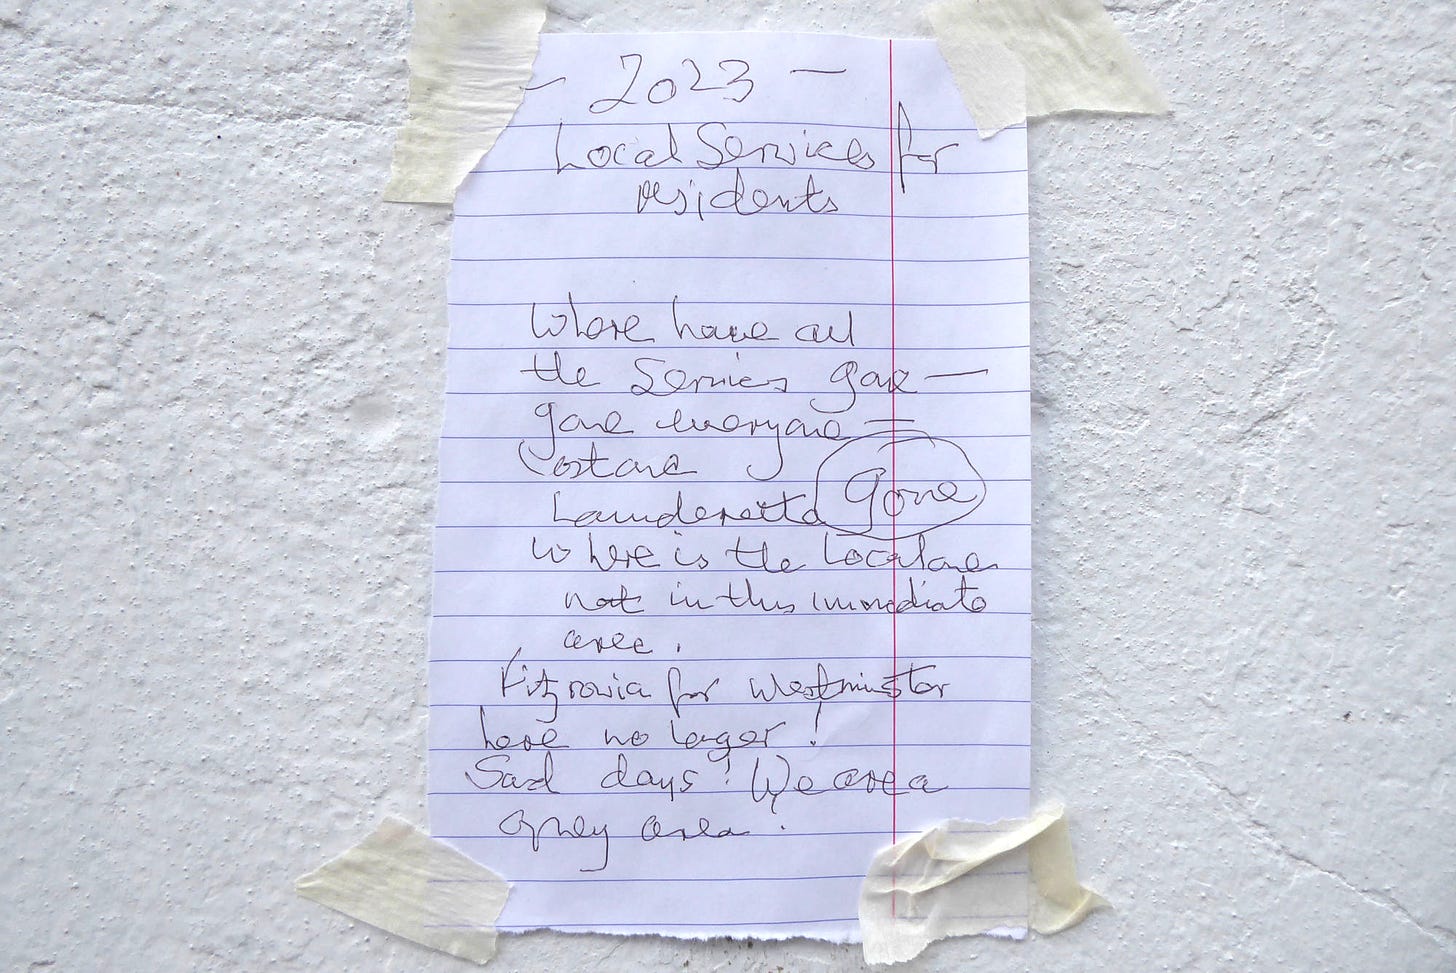 Handwriten note taped to a wall asks where have all the local services gone.